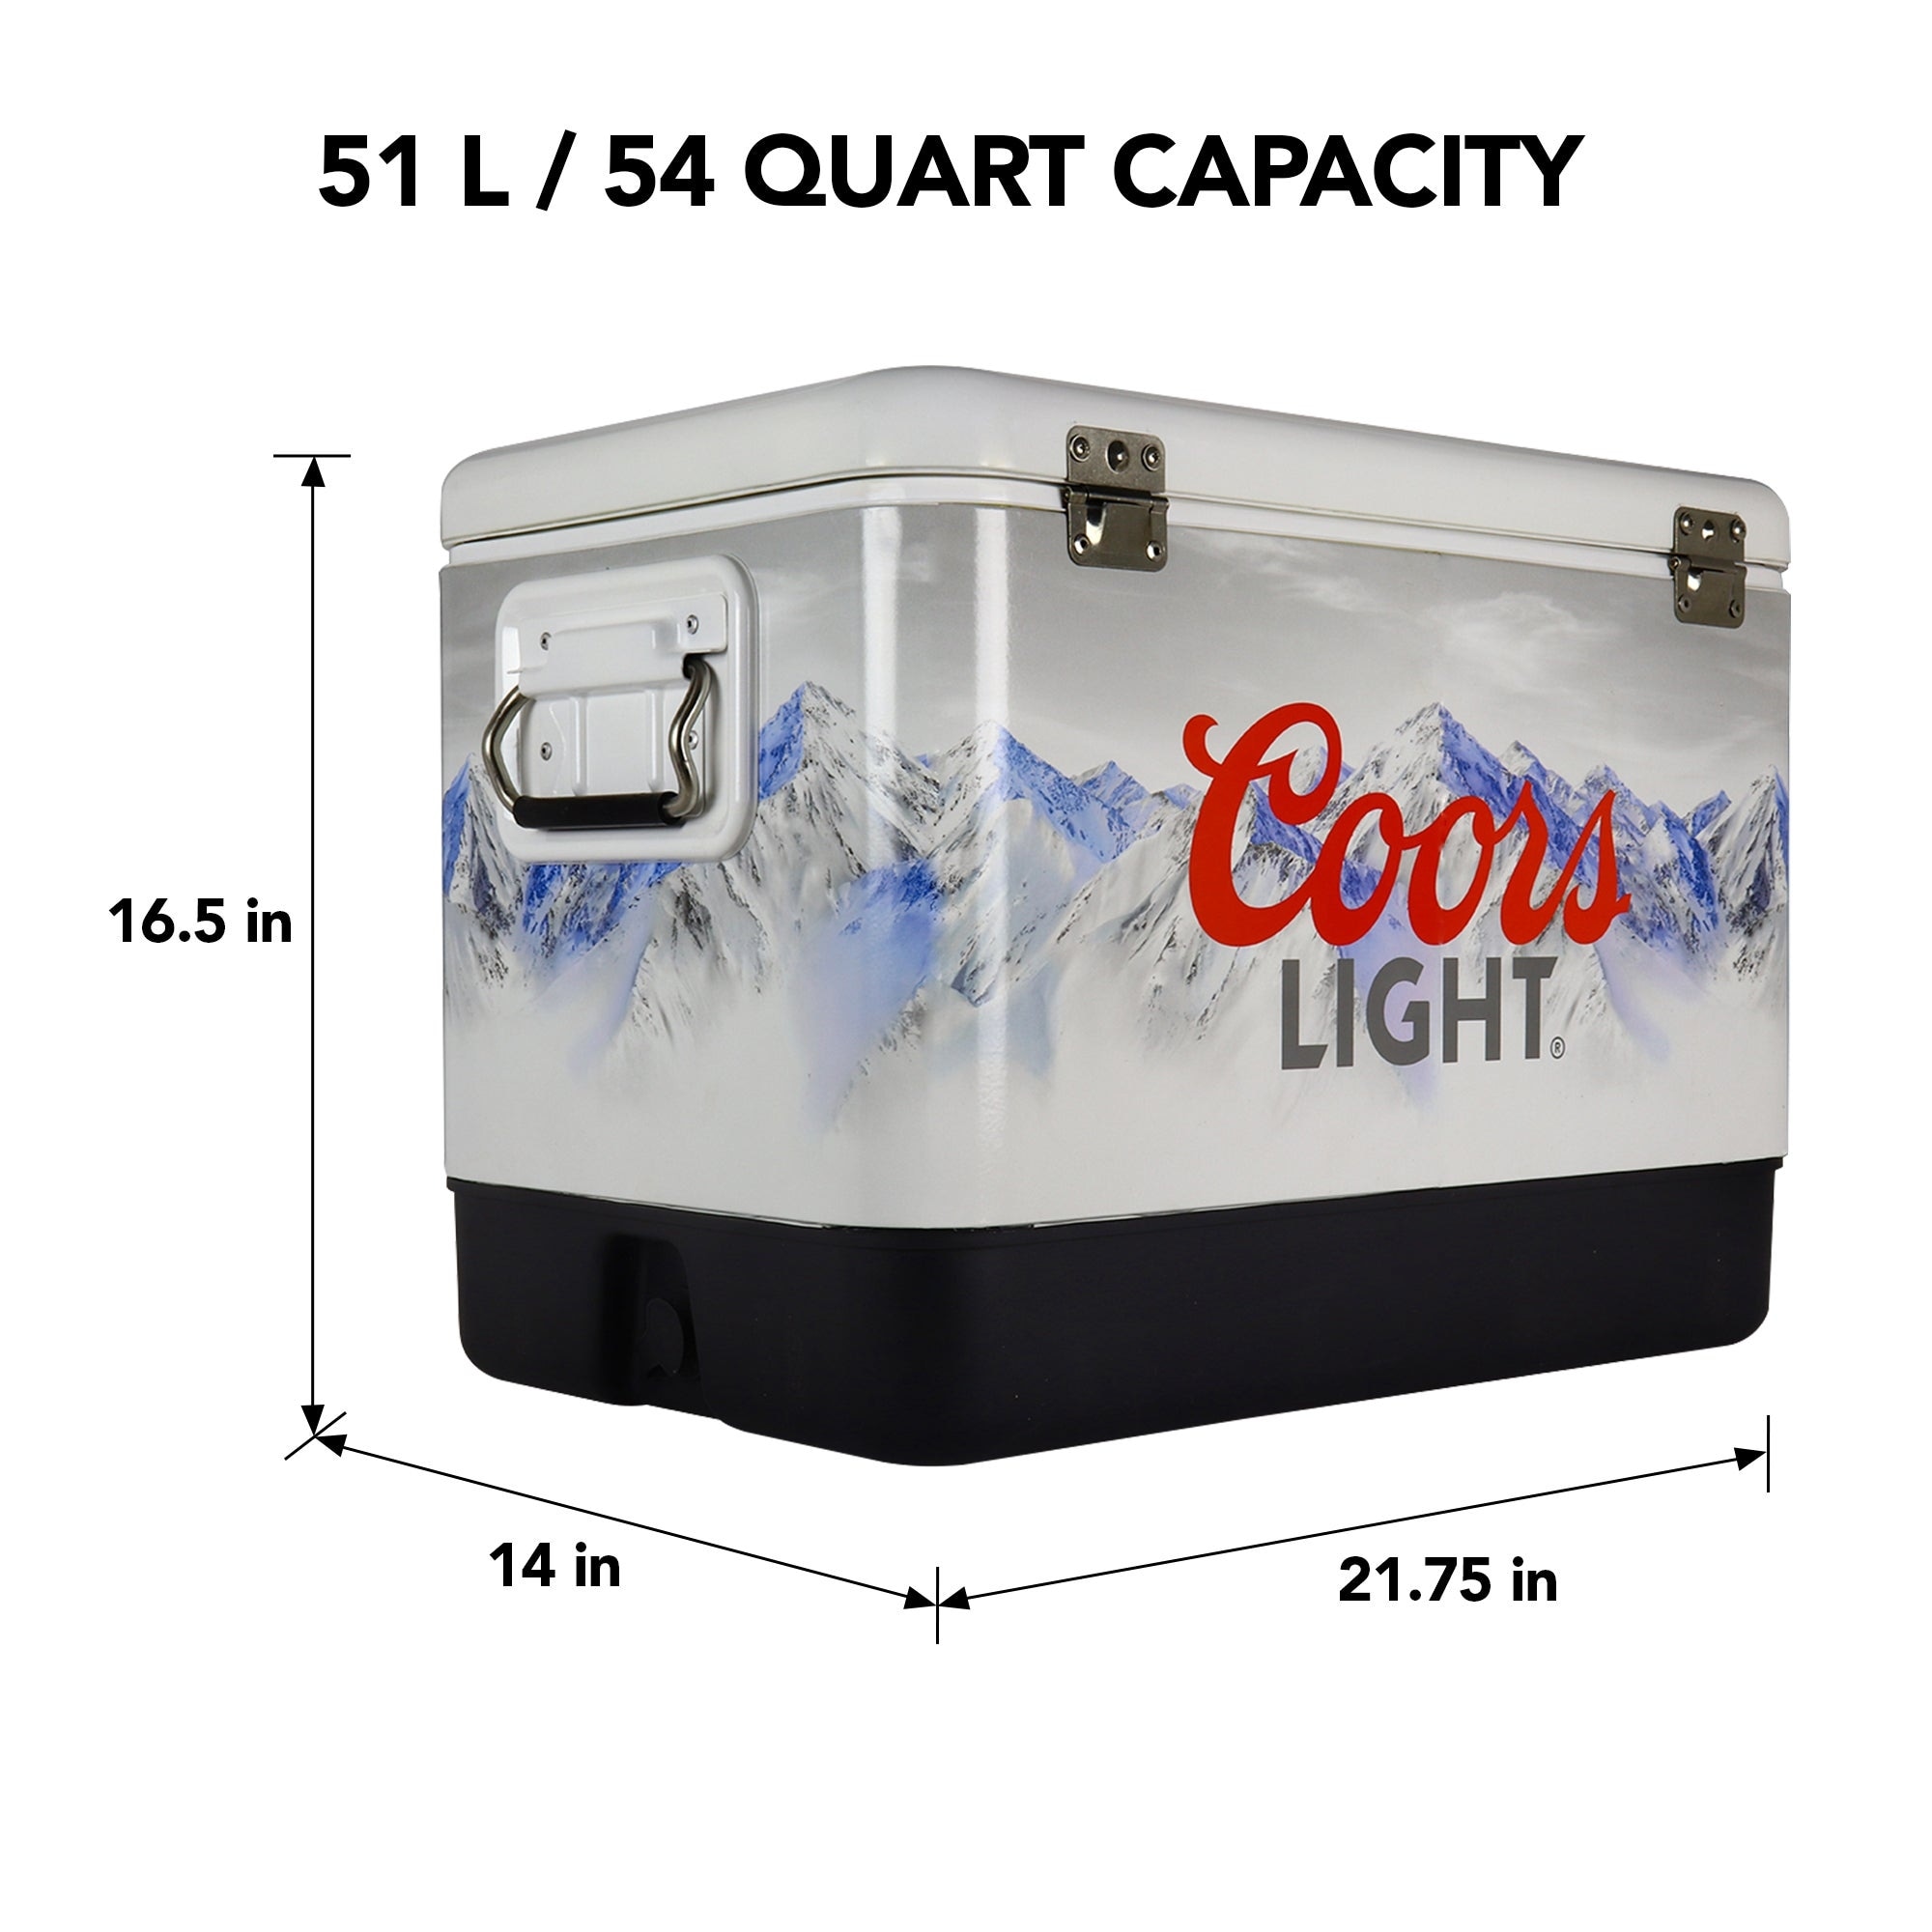 https://ak1.ostkcdn.com/images/products/is/images/direct/2069e9c3230ba64ca4dd81deed2676d5f4557401/Coors-Light-Ice-Chest-Beverage-Cooler-with-Bottle-Opener-51L-%2854-qt%29-85-Can-Capacity-White-and-Black.jpg